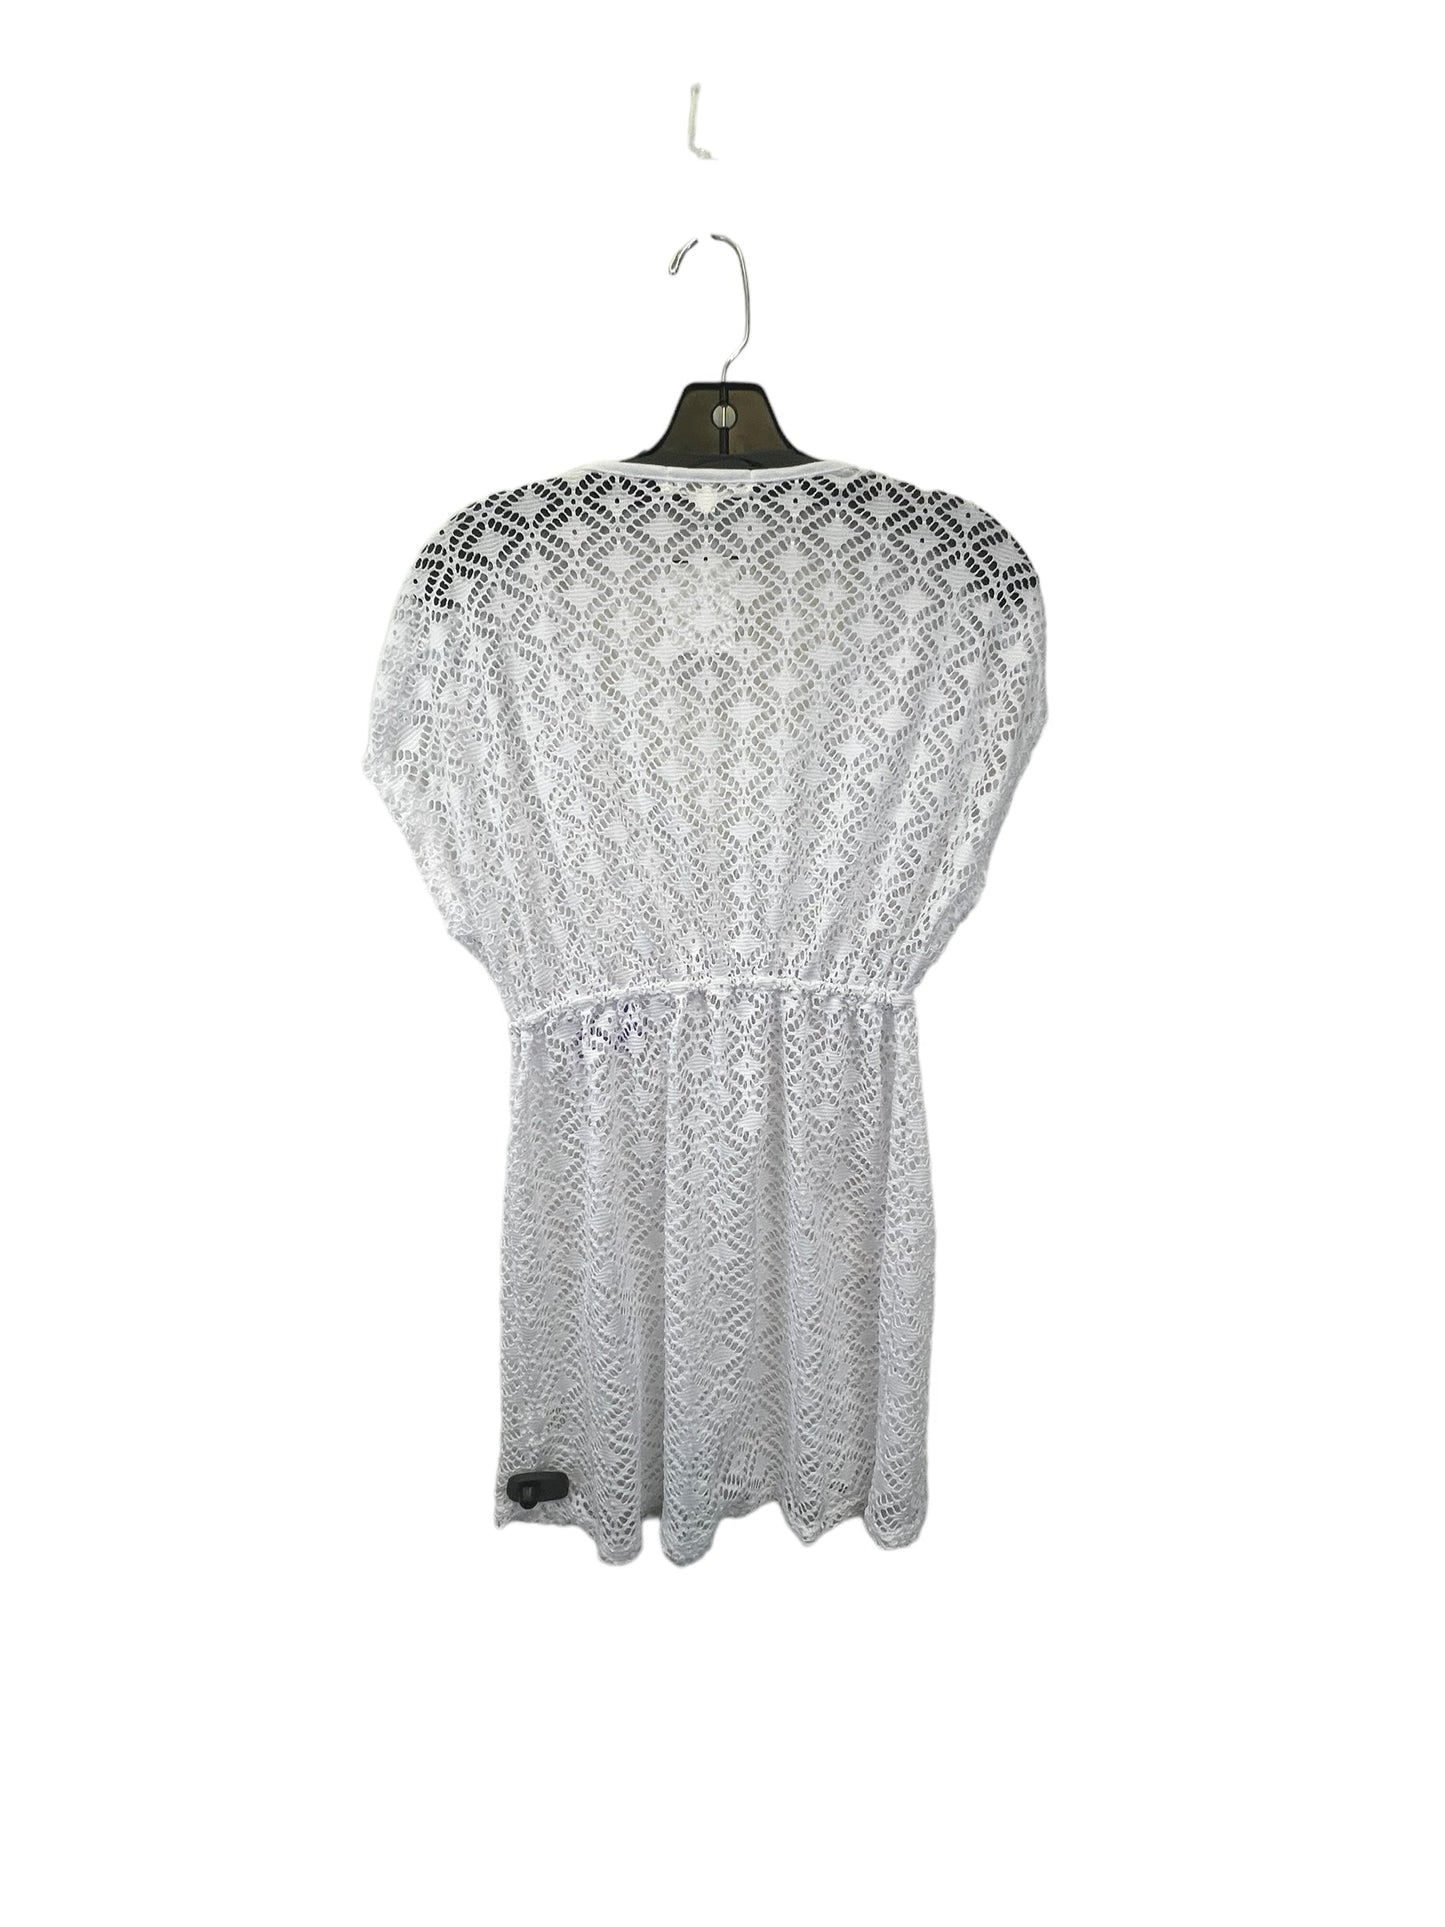 White Swimwear Cover-up Clothes Mentor, Size Xs